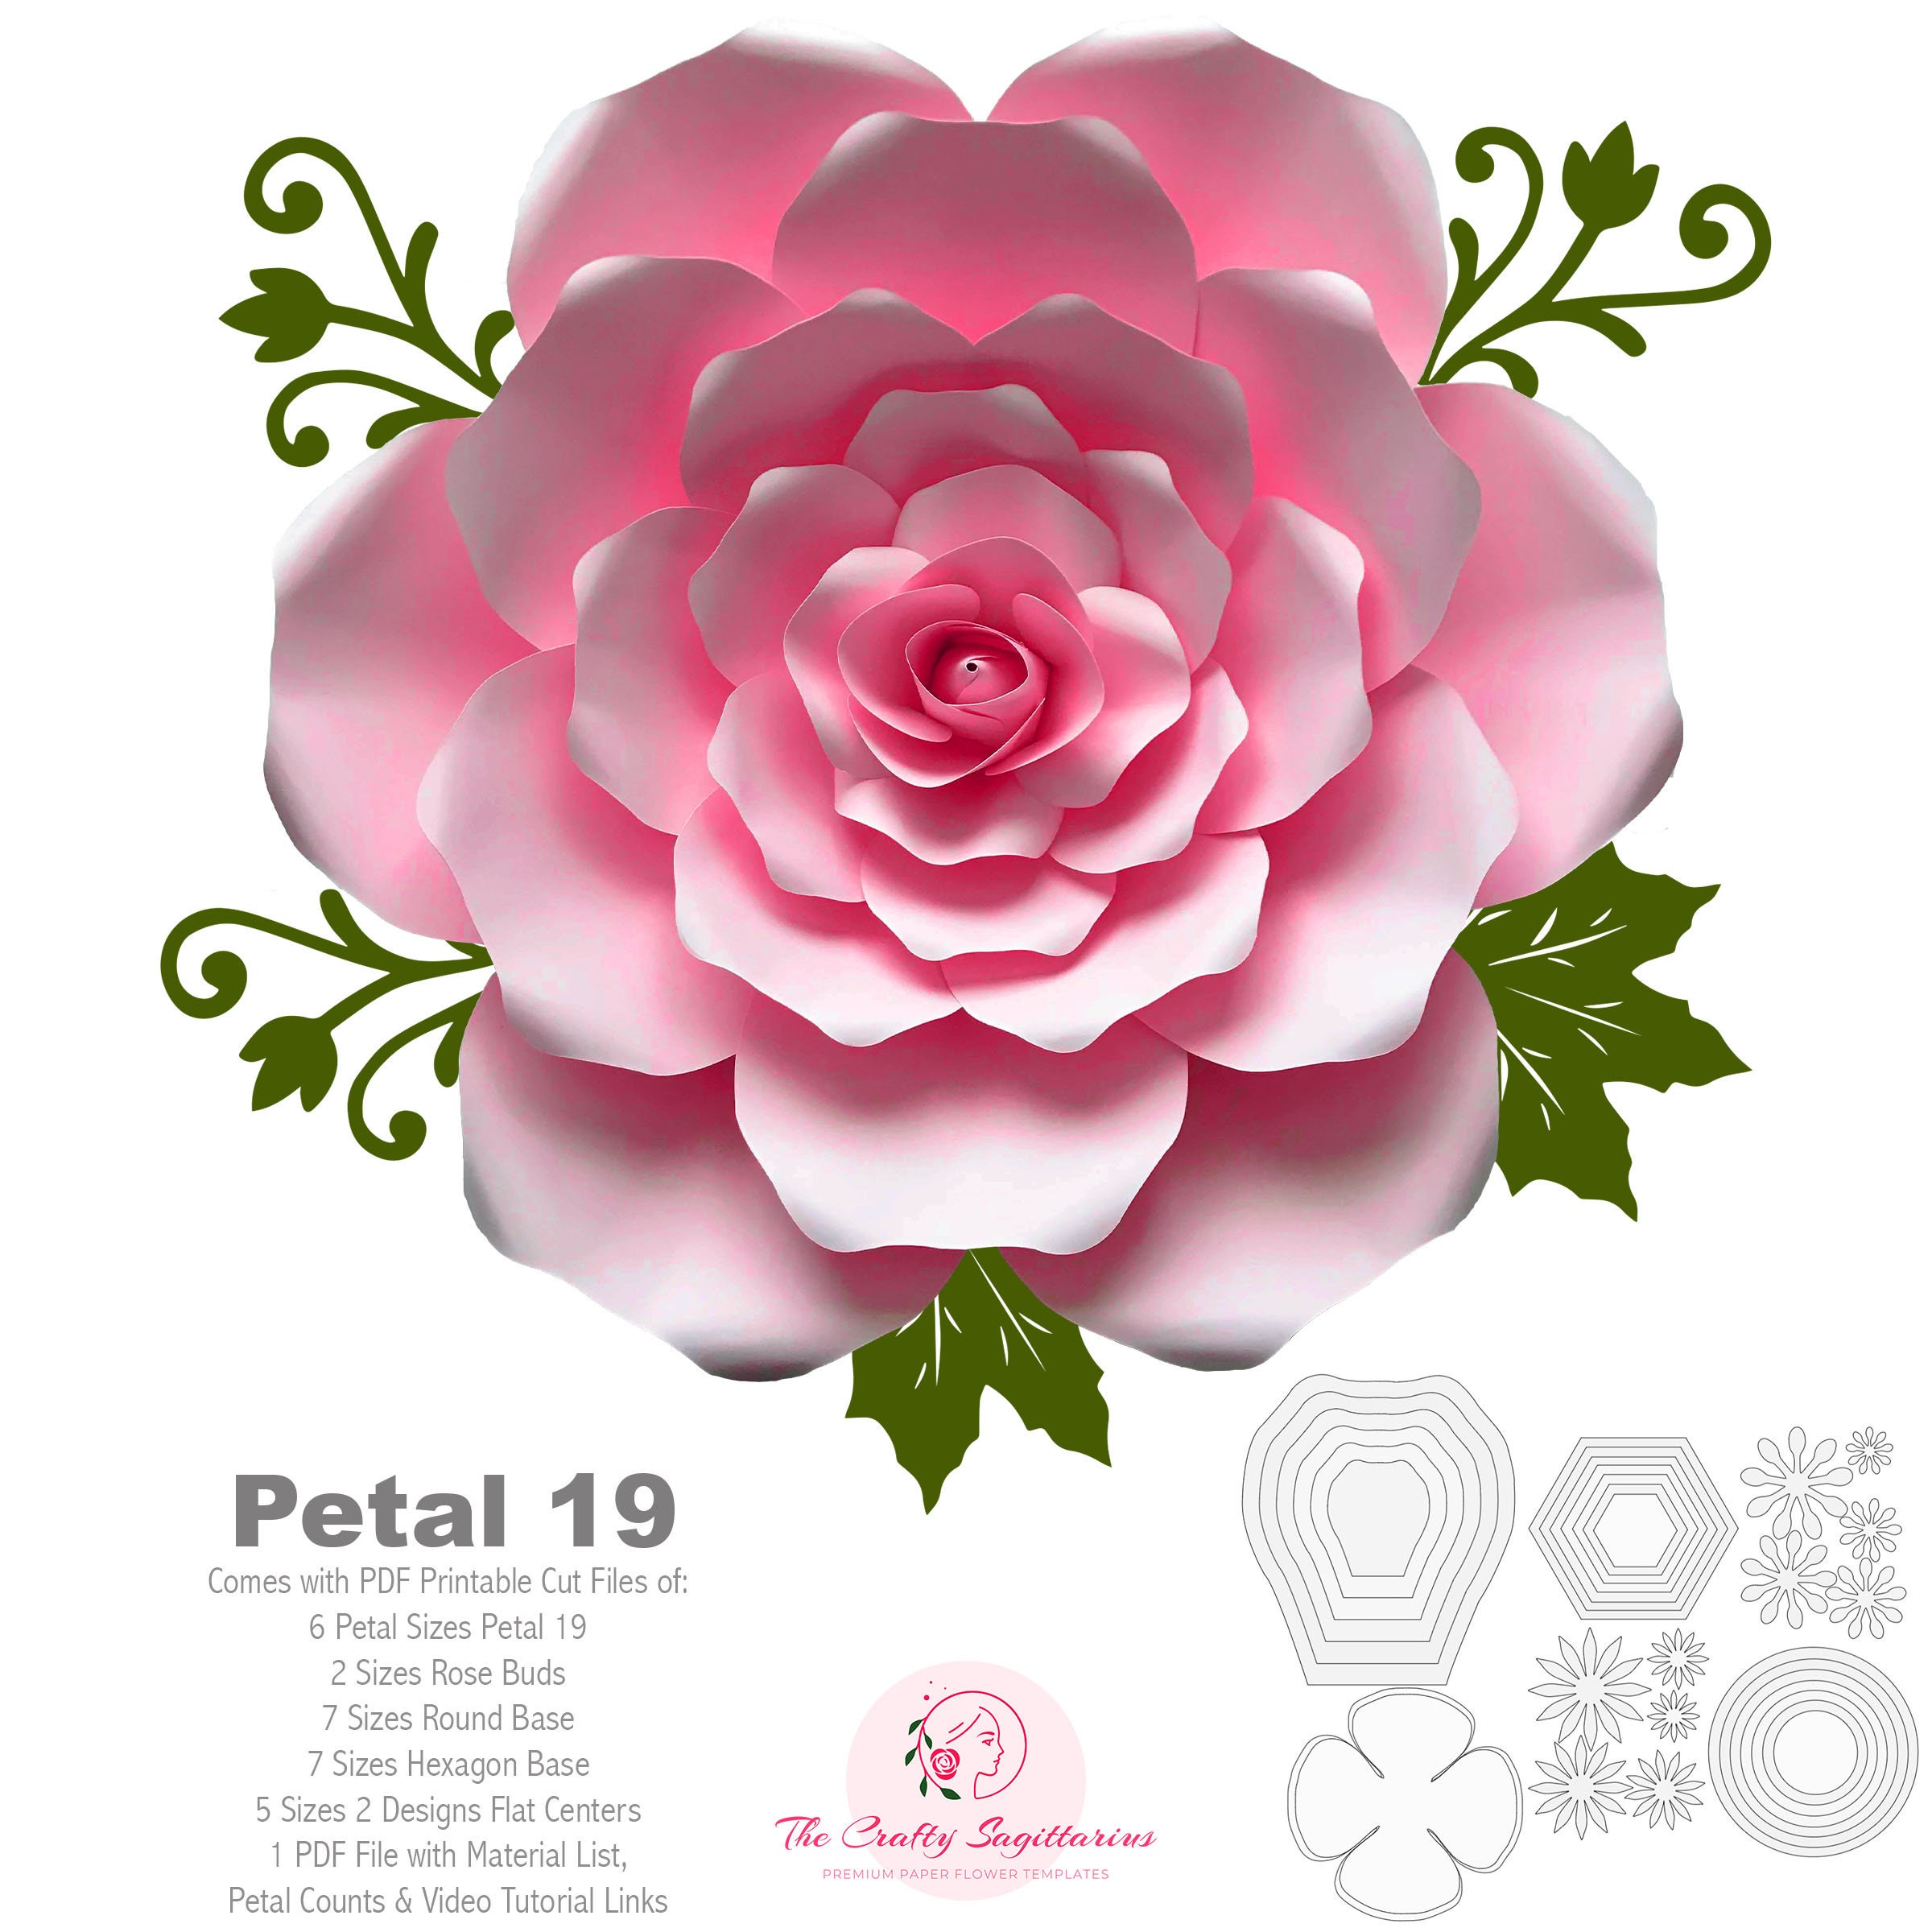 crepe-paper-roses-and-a-free-printable-template-country-hill-cottage